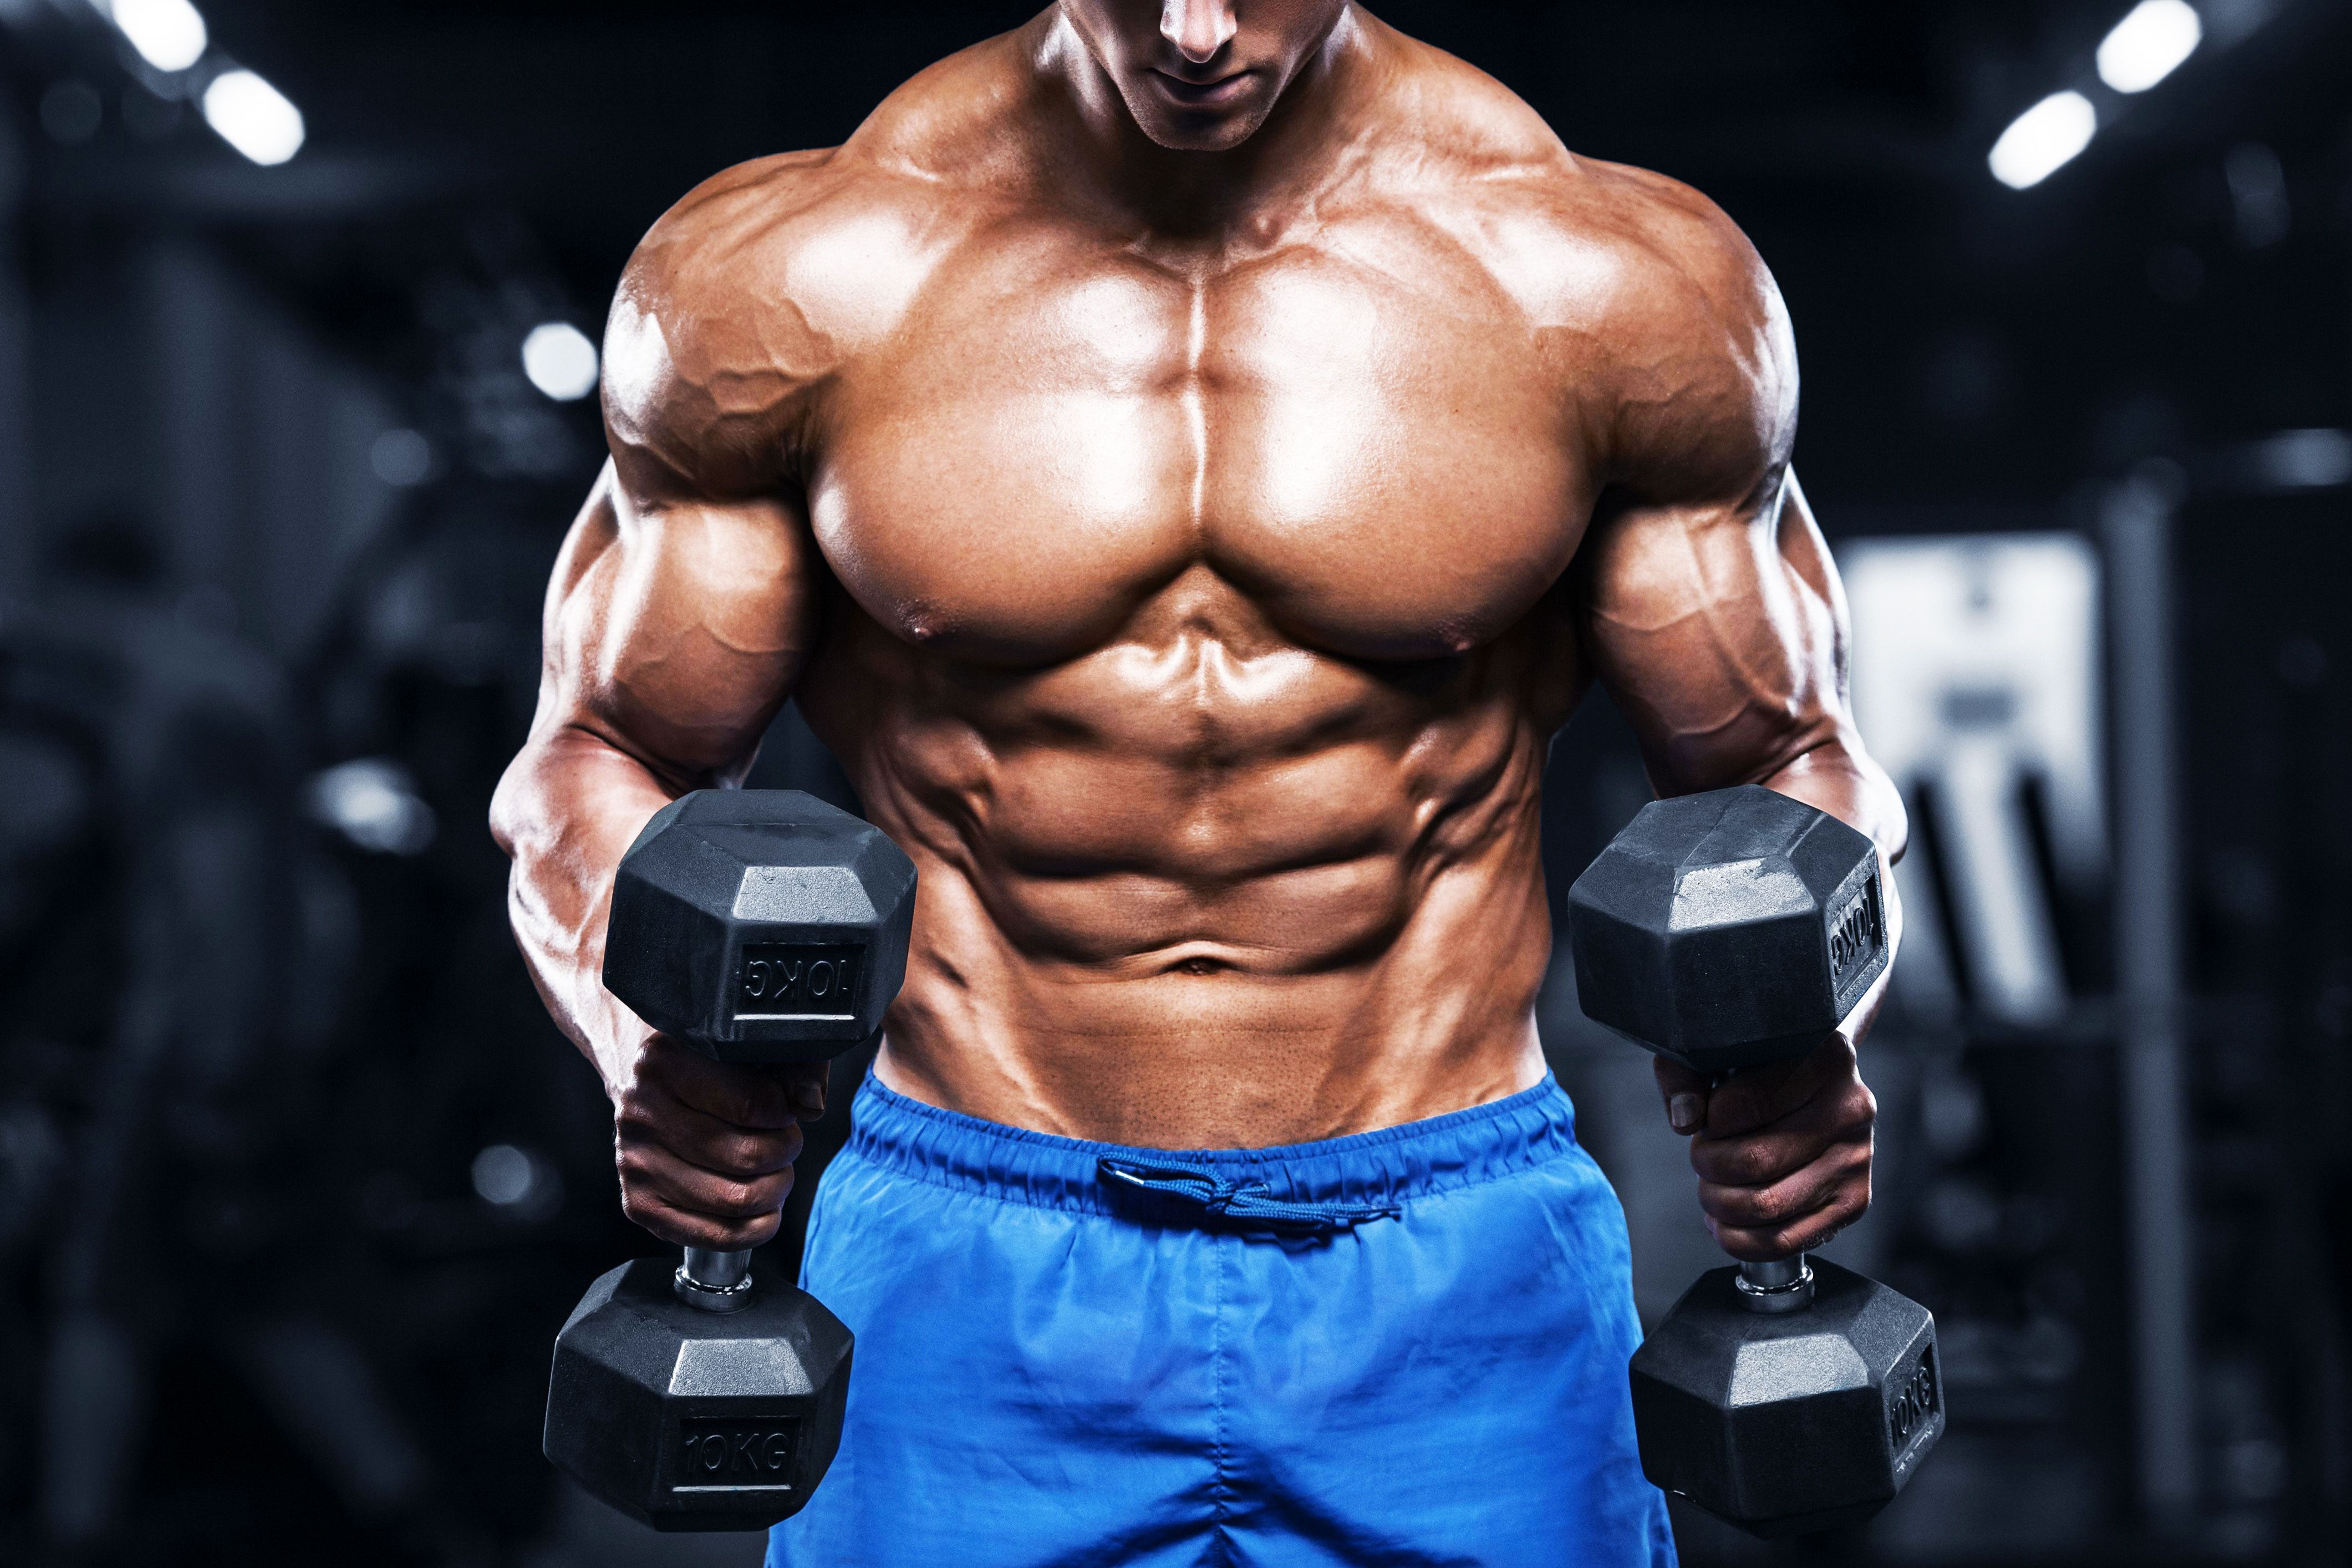 How to Gain Muscle Fast - 10 Tips for Men for Protein Synthesis